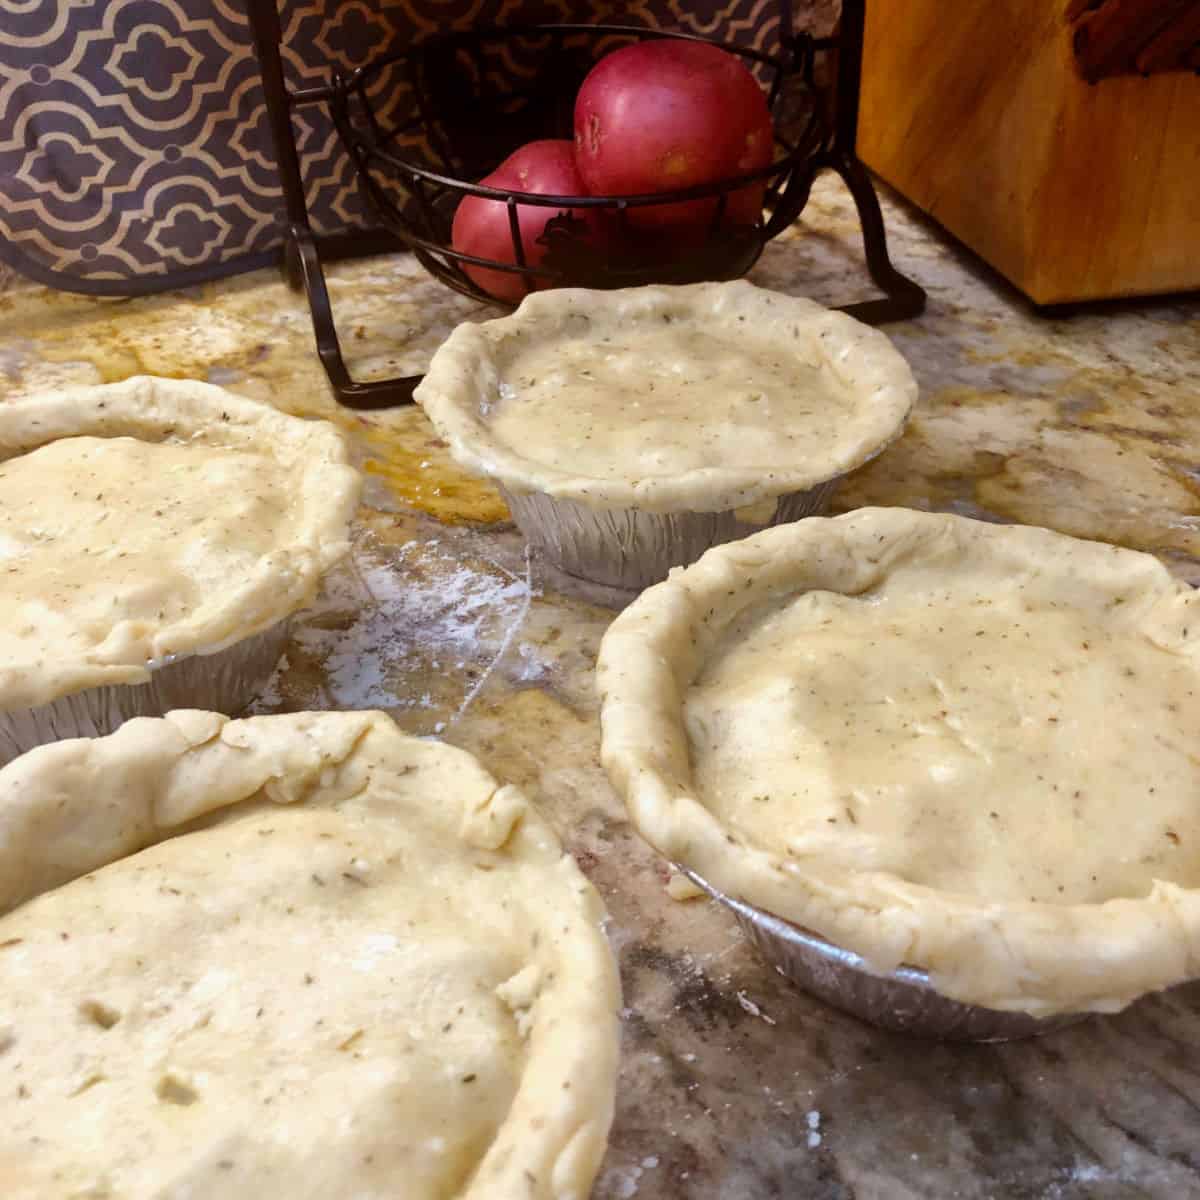 The finished pies with crusts folded in.